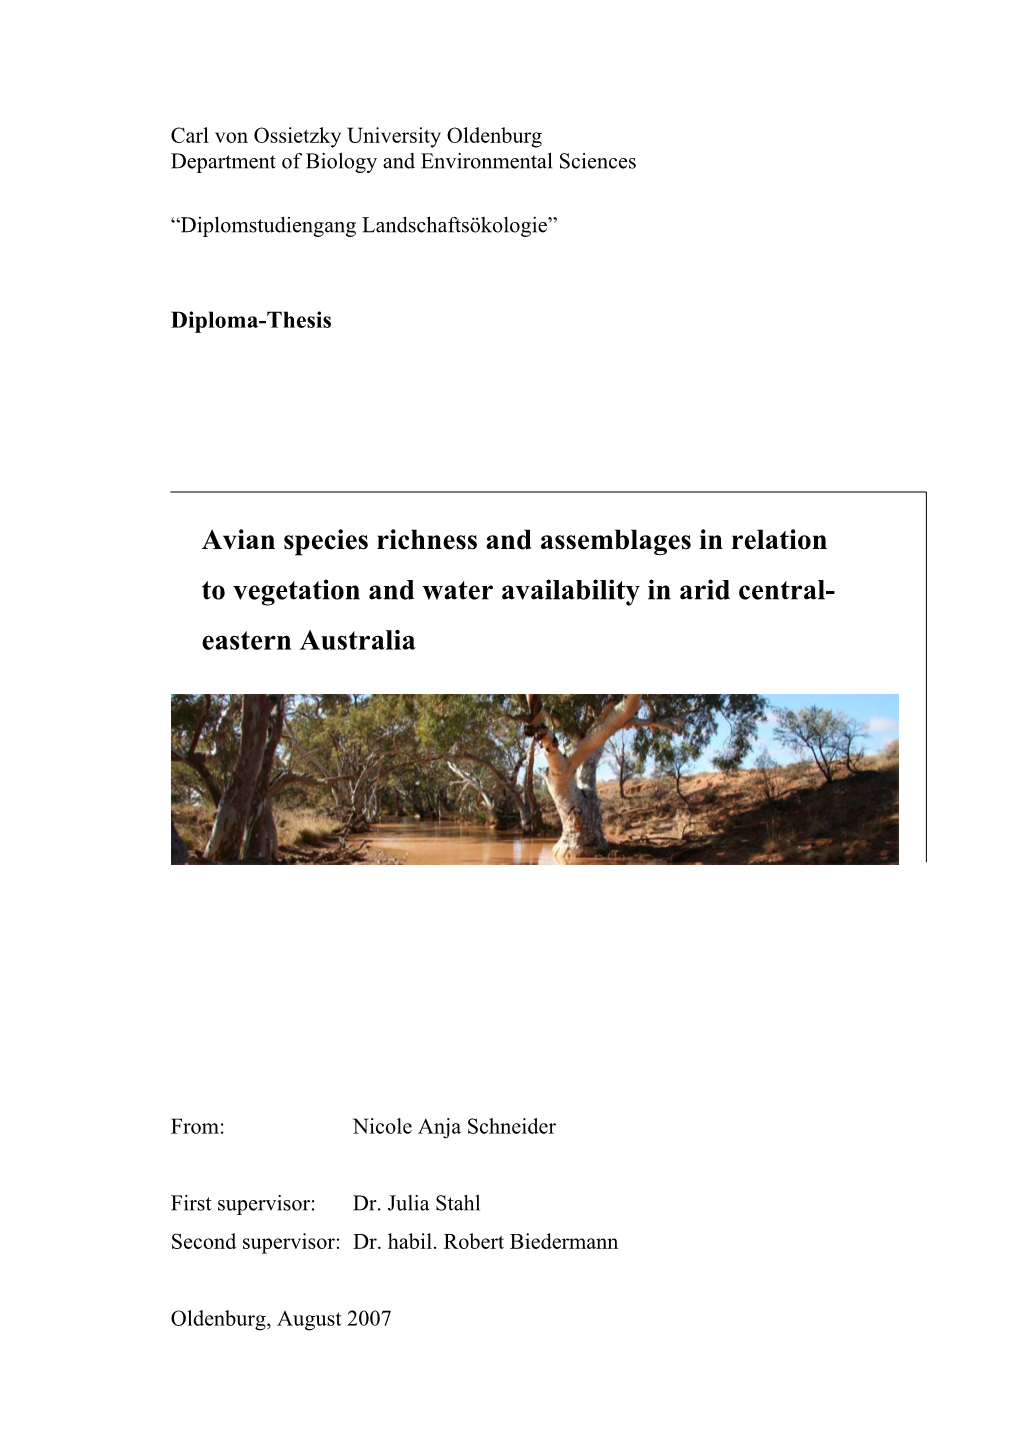 Avian Species Richness and Assemblages in Relation to Vegetation and Water Availability in Arid Central- Eastern Australia